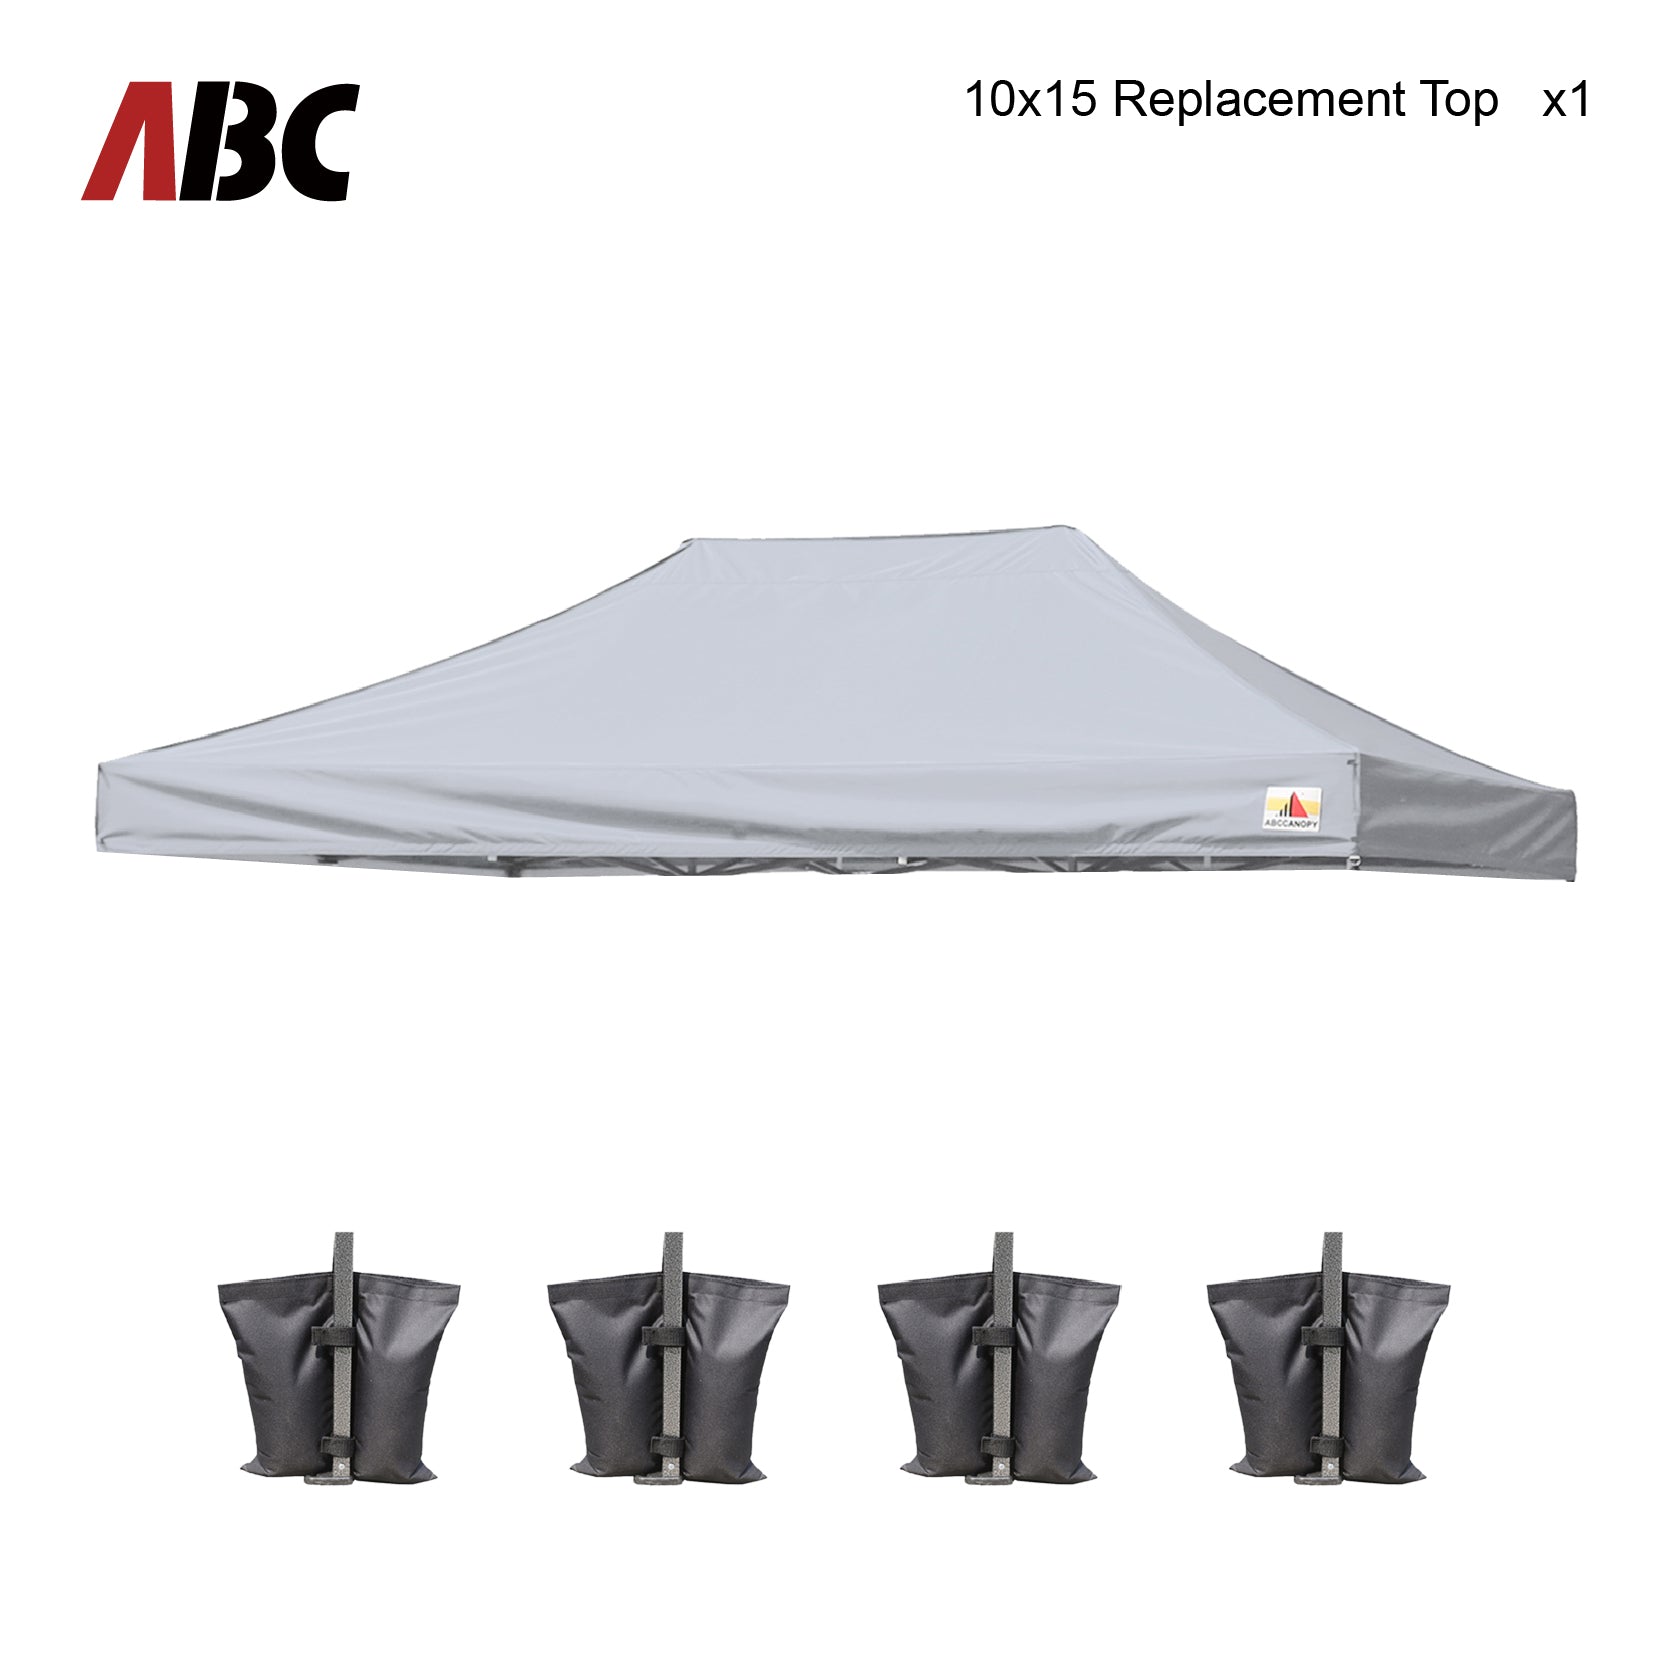 Top cover for 10x15 pop-up canopy